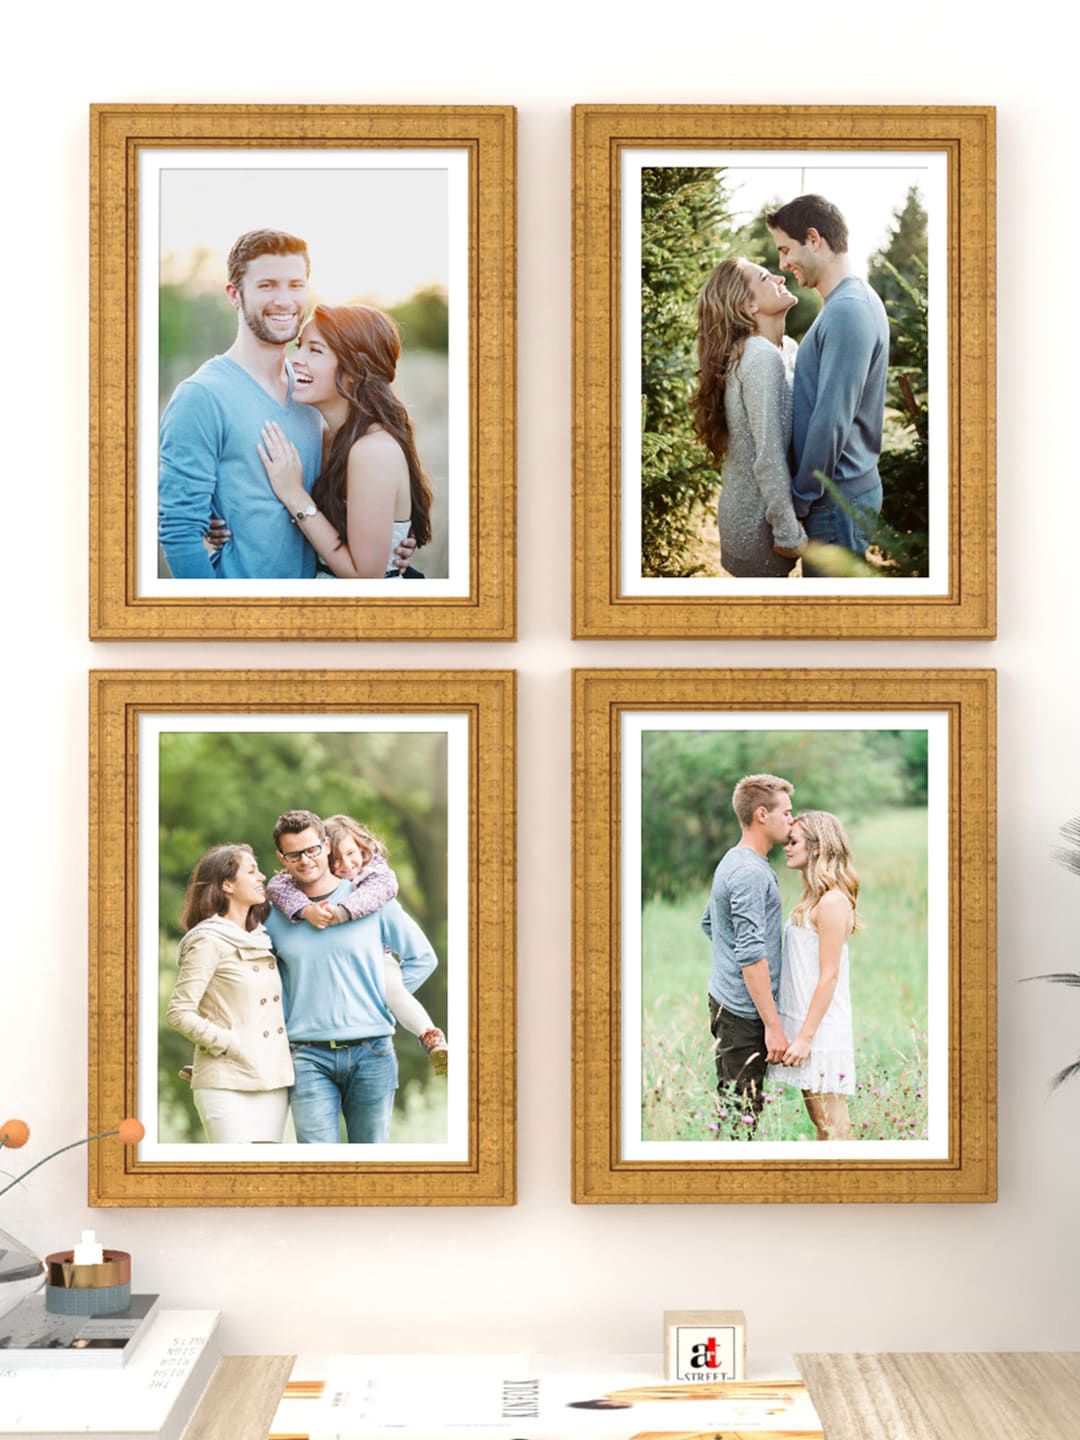 Art Street Set of 4 Gold-Colored Photo Frames Price in India